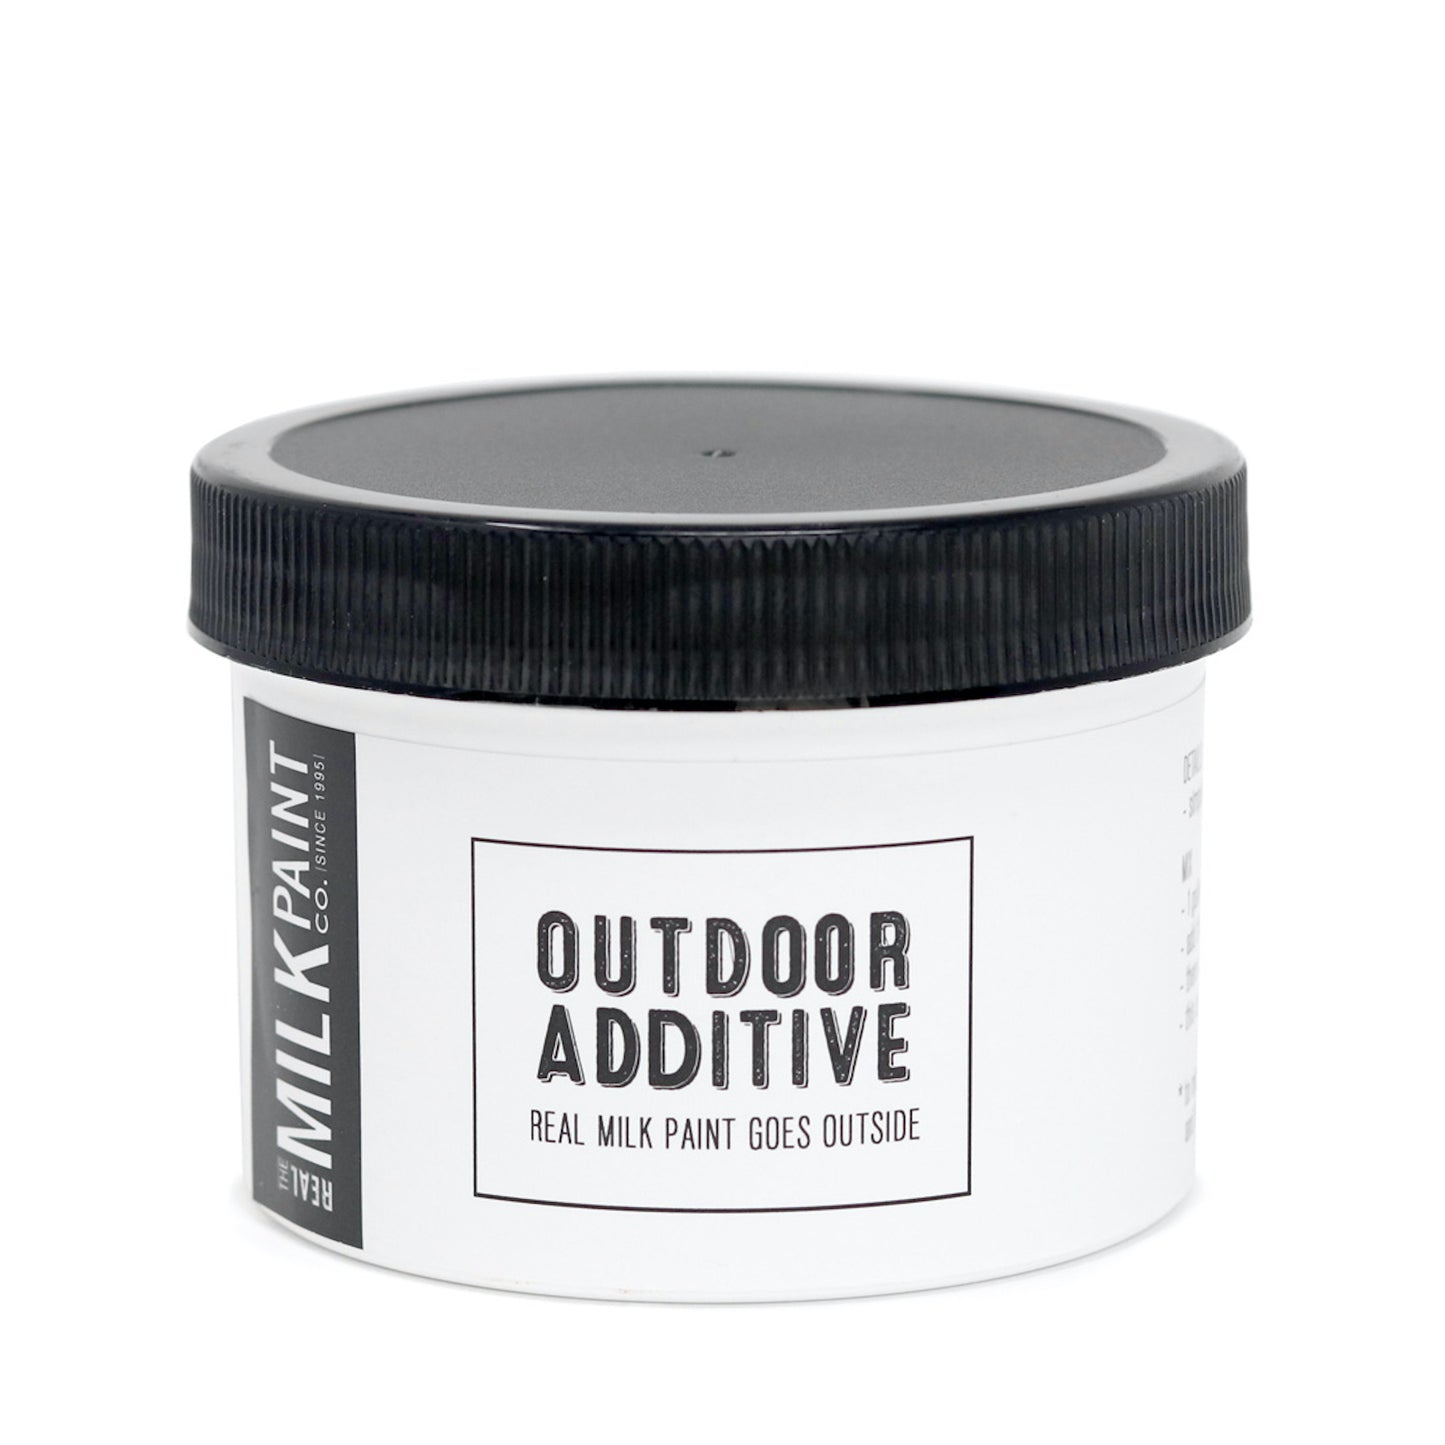 Outdoor Additive for Milk Paint